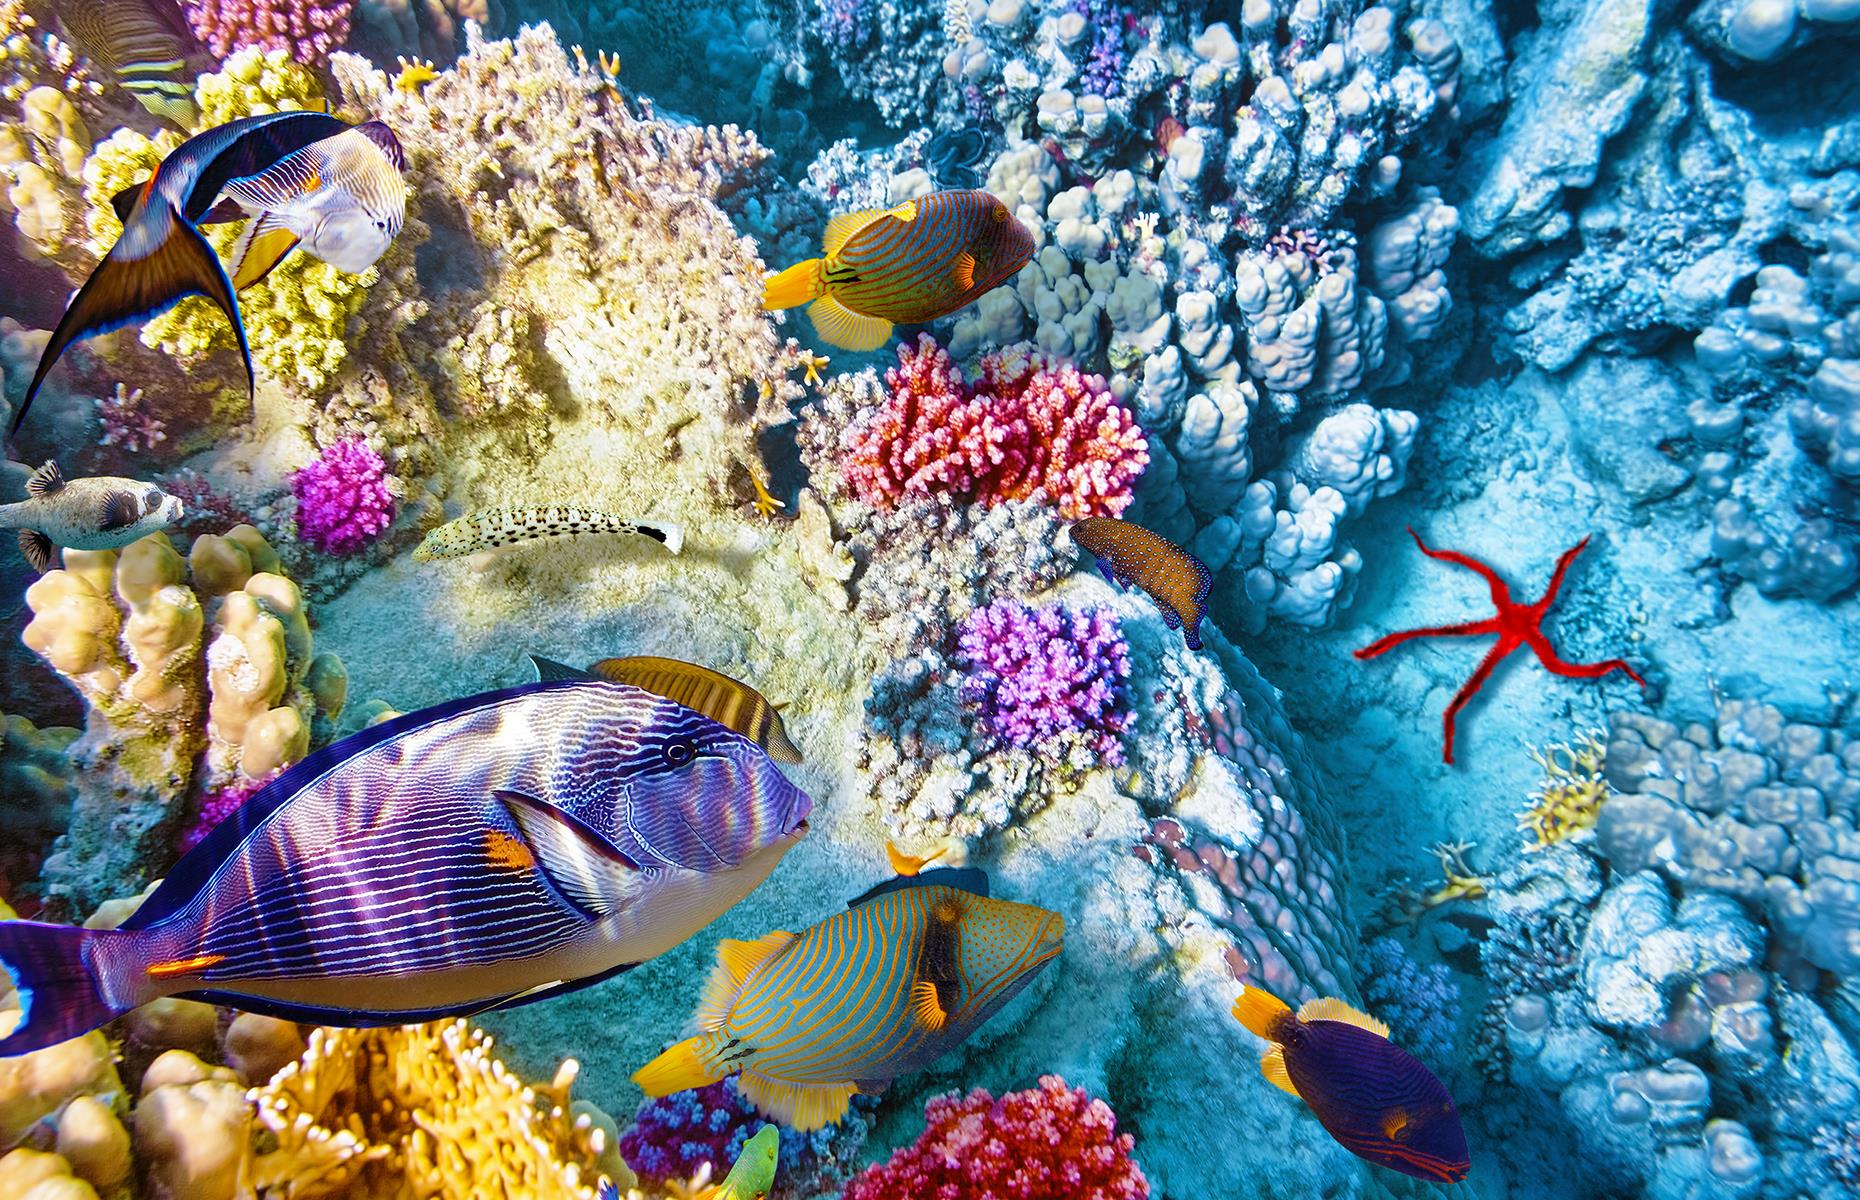 Belize packs quite a punch, despite its small size. Running along its coast is the second-largest coral reef in the world. The kaleidoscopic coral, sea turtles, parrotfish, dolphins and rays simply demand that you jump in a kayak, don a snorkel mask or a tank and discover an amazing underwater realm.